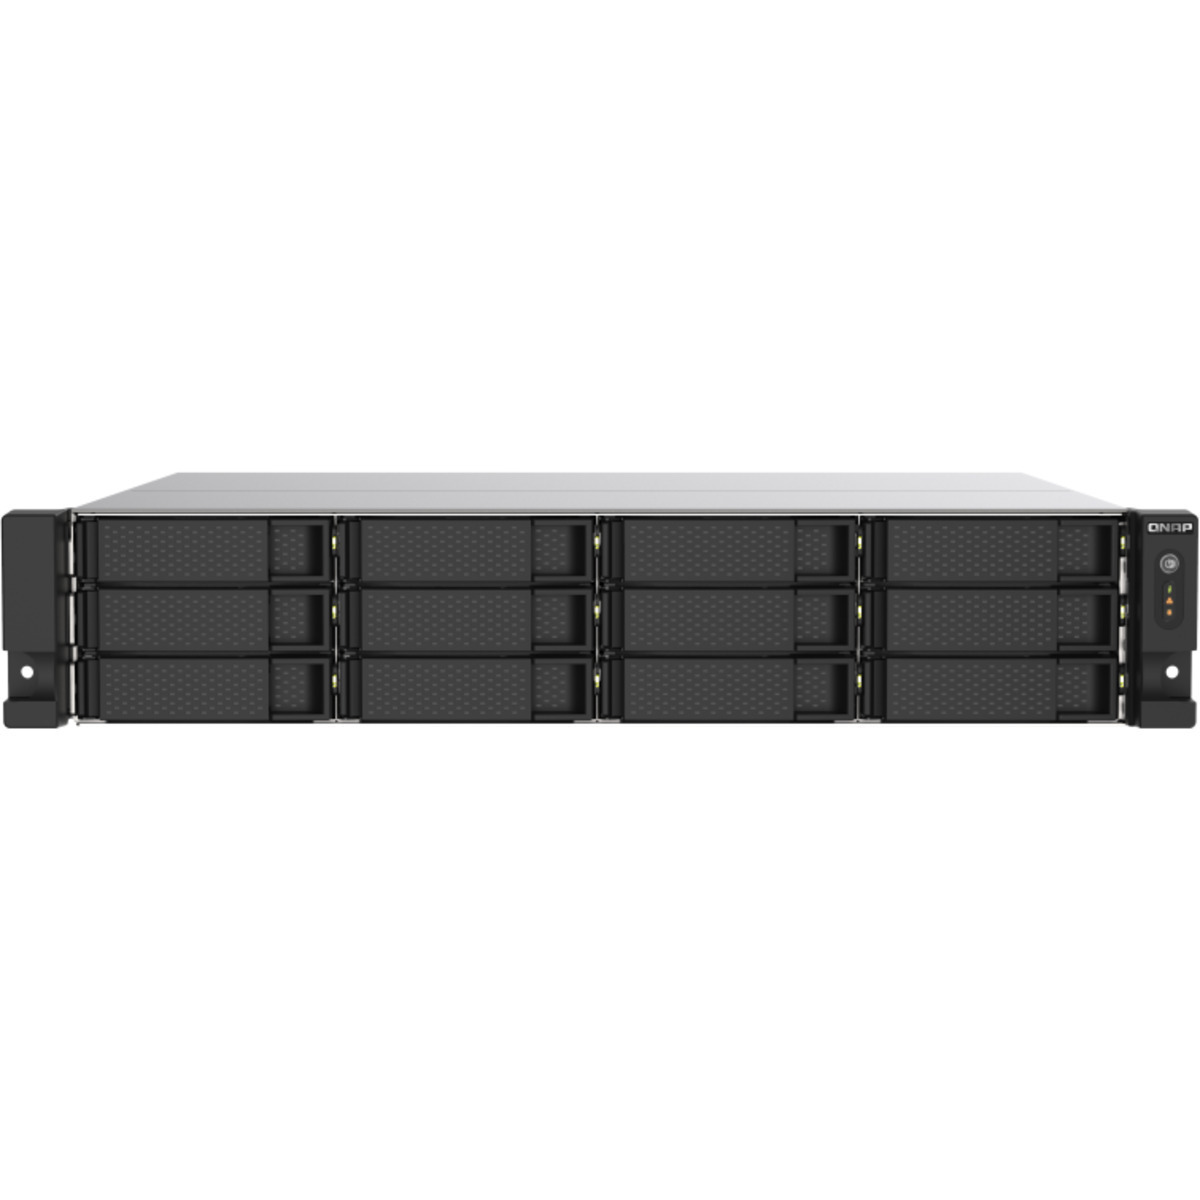 QNAP TS-1273AU-RP 54tb 12-Bay RackMount Multimedia / Power User / Business NAS - Network Attached Storage Device 9x6tb Seagate IronWolf Pro ST6000NT001 3.5 7200rpm SATA 6Gb/s HDD NAS Class Drives Installed - Burn-In Tested - FREE RAM UPGRADE TS-1273AU-RP